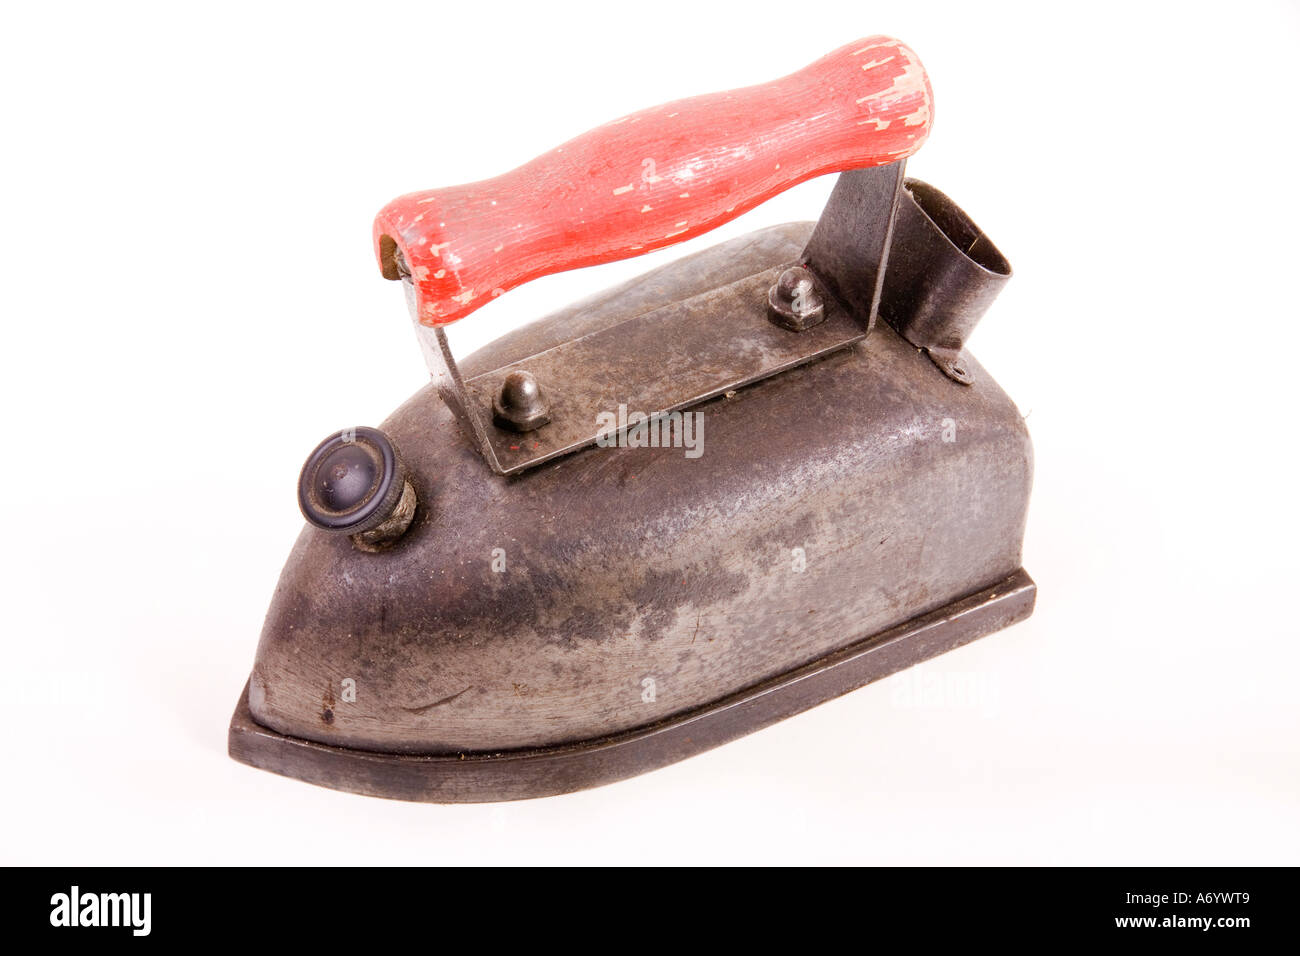 Old electric iron Stock Photo